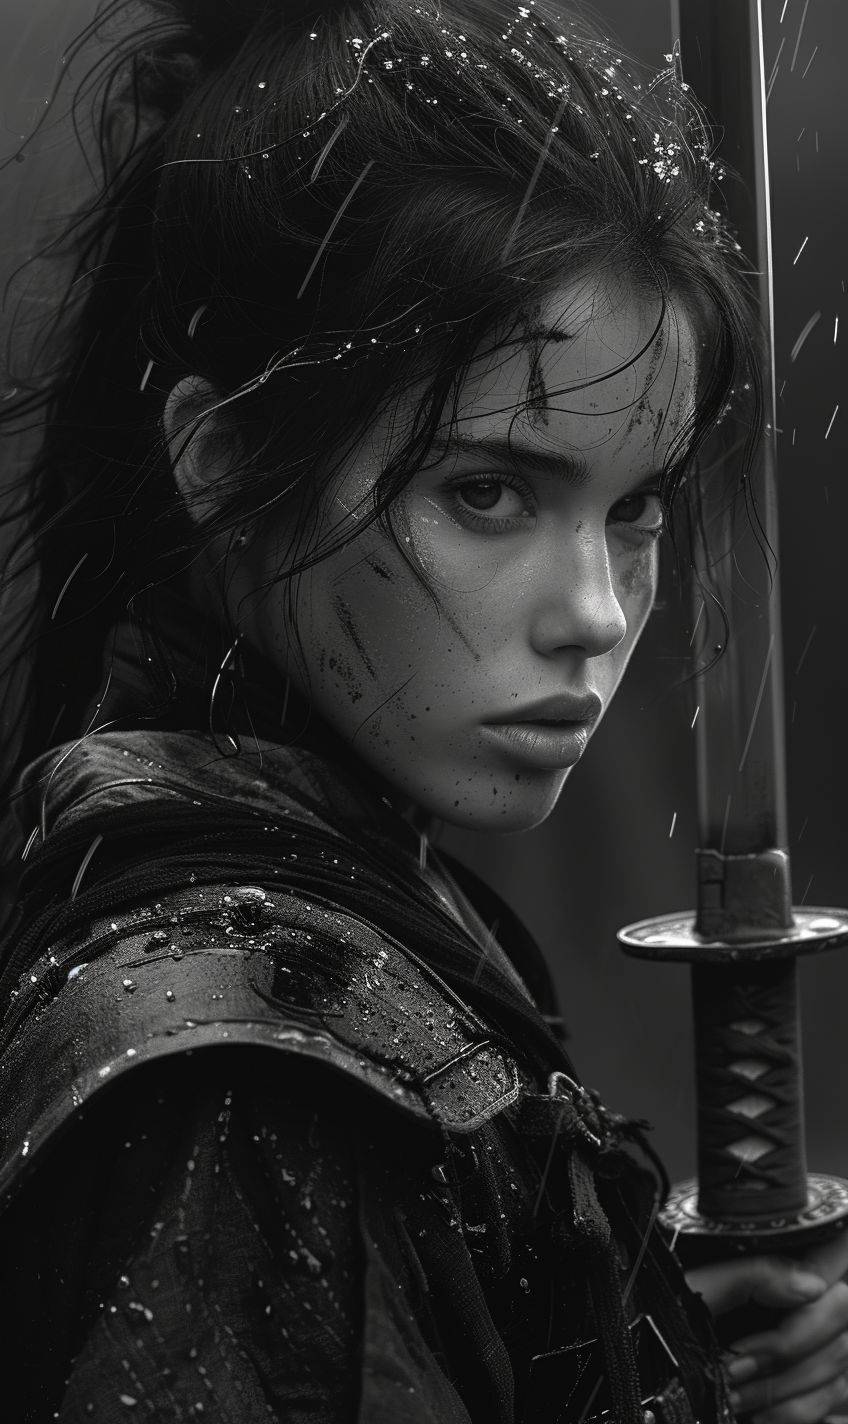 Samurai girl in the style of black and white realism, atmospheric impressionism, darkly romantic realism, pre-raphaelite realism, grainy black and white photos, soft-focused realism